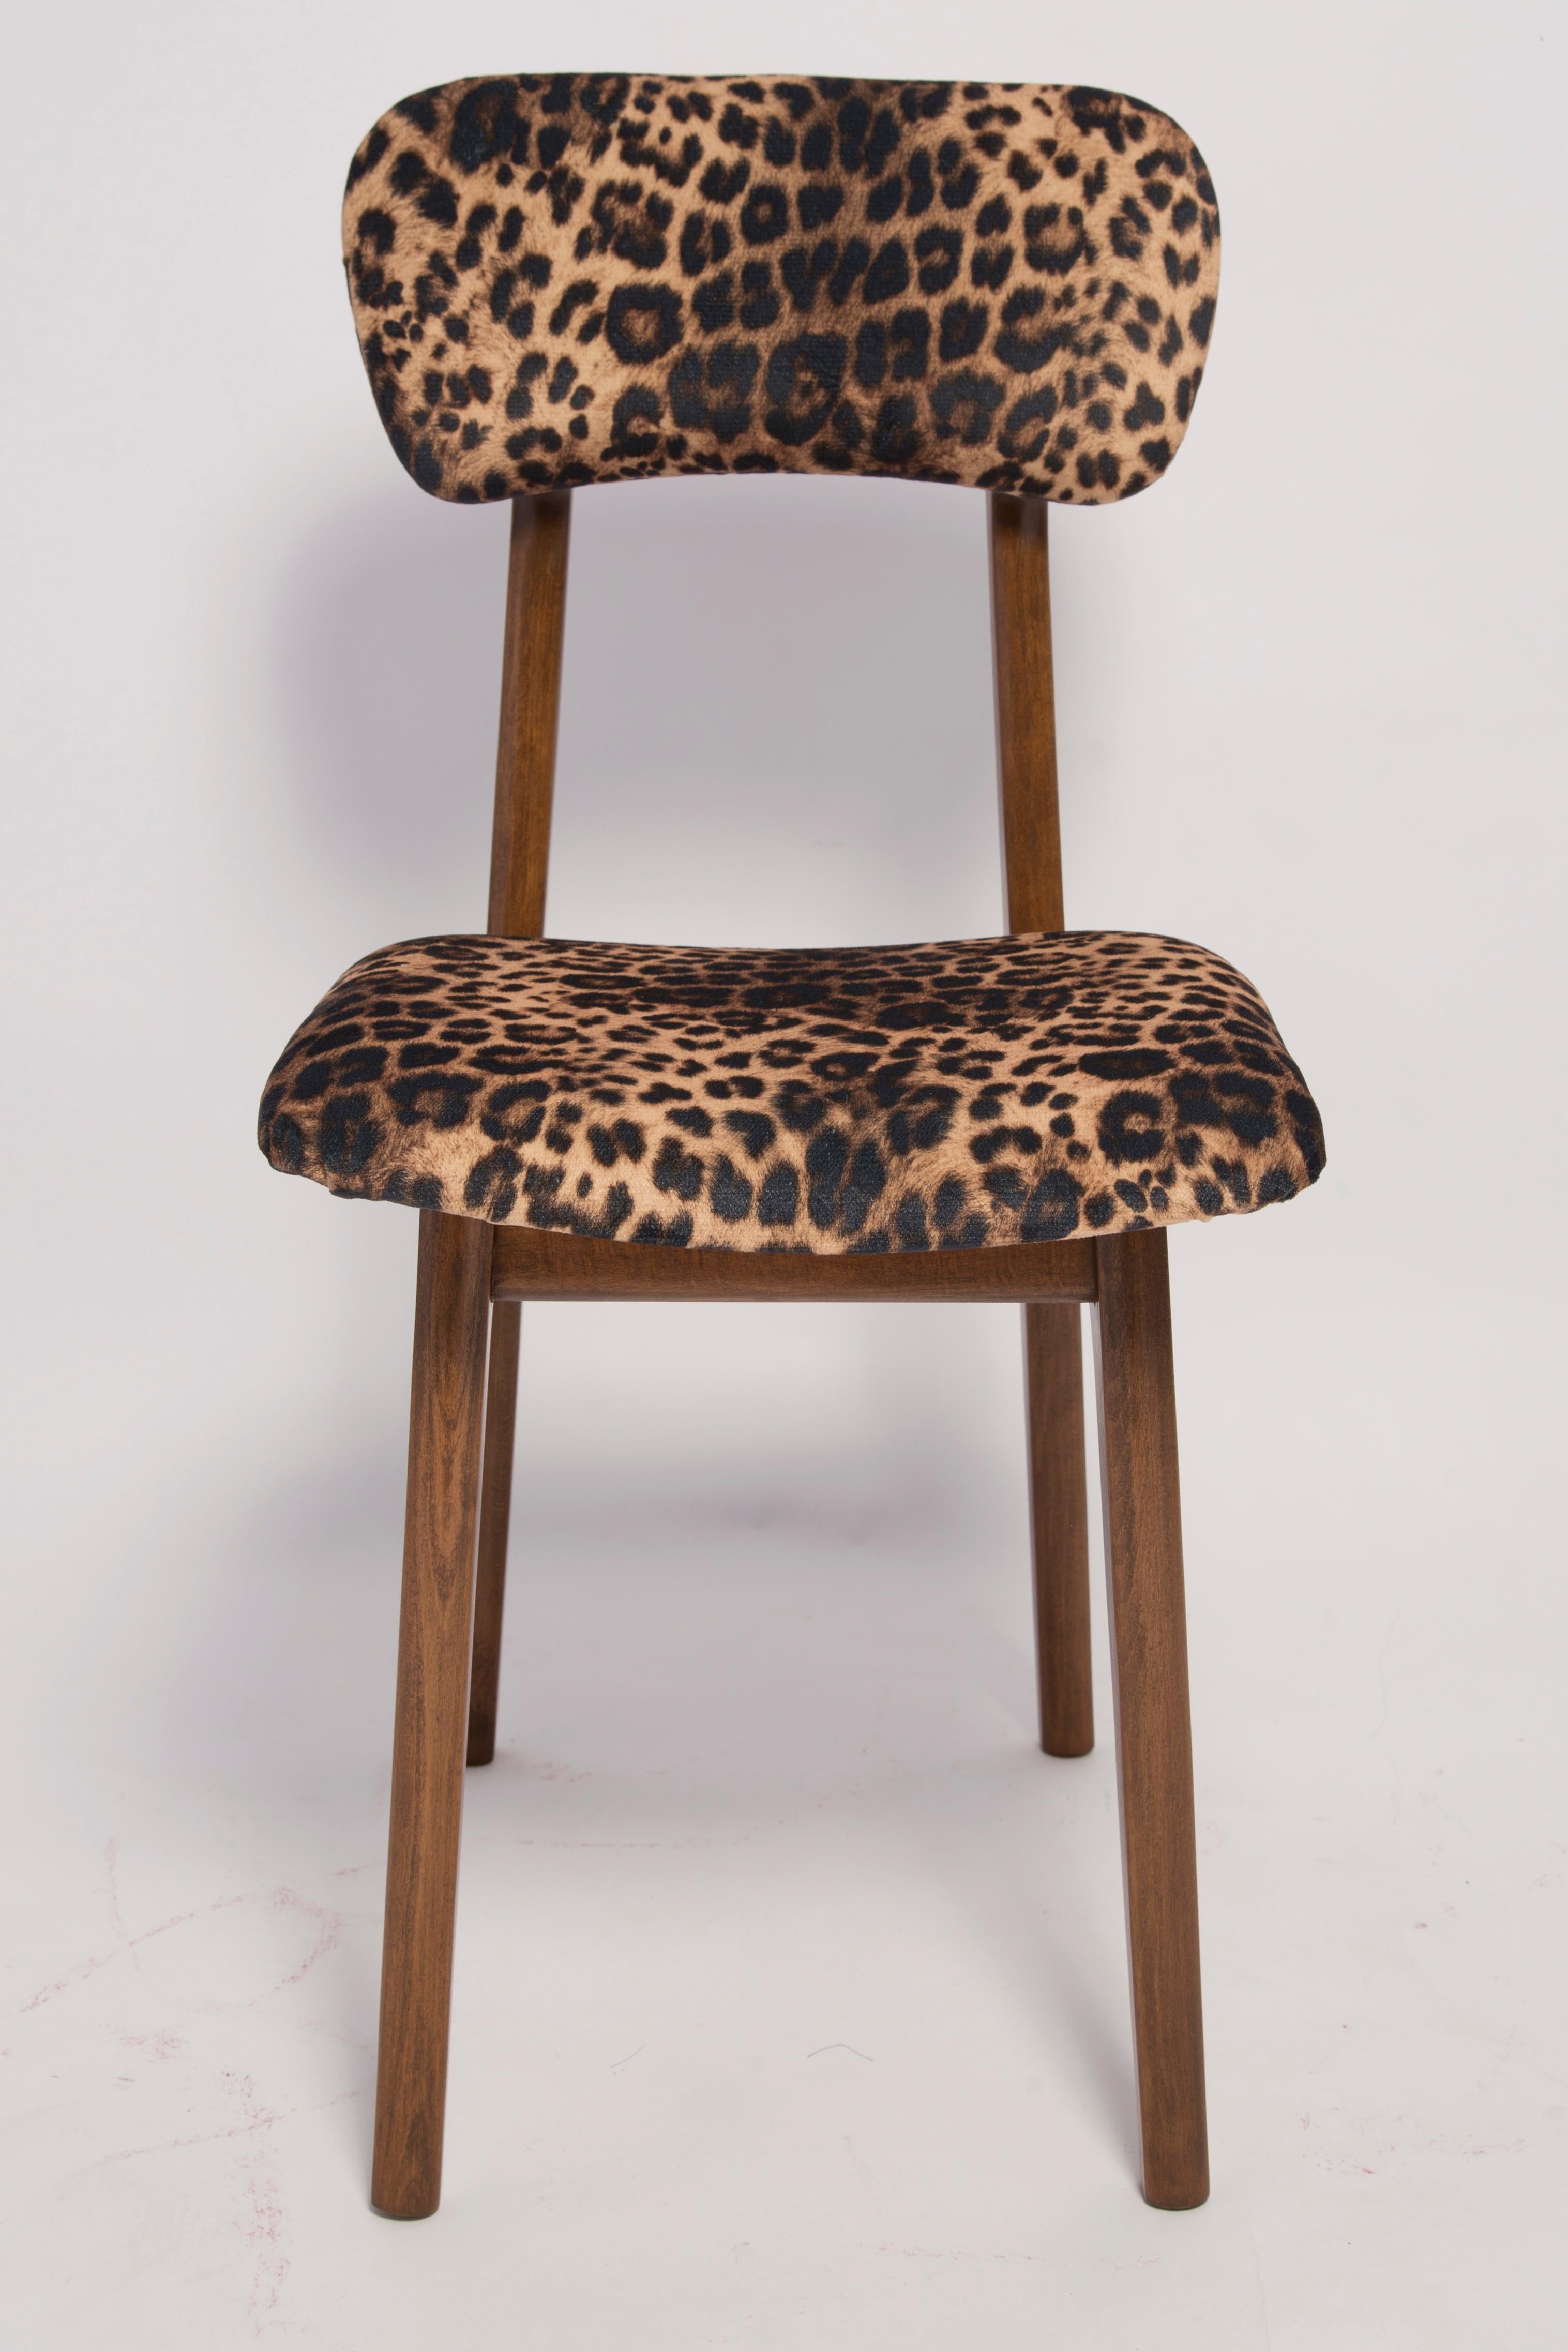 Chair designed by Prof. Rajmund Halas. Made of beechwood. Chair is after a complete upholstery renovation, the woodwork has been refreshed. Seat is dressed in leopard, durable and pleasant to the touch unique velvet fabric. Chair is stable and very